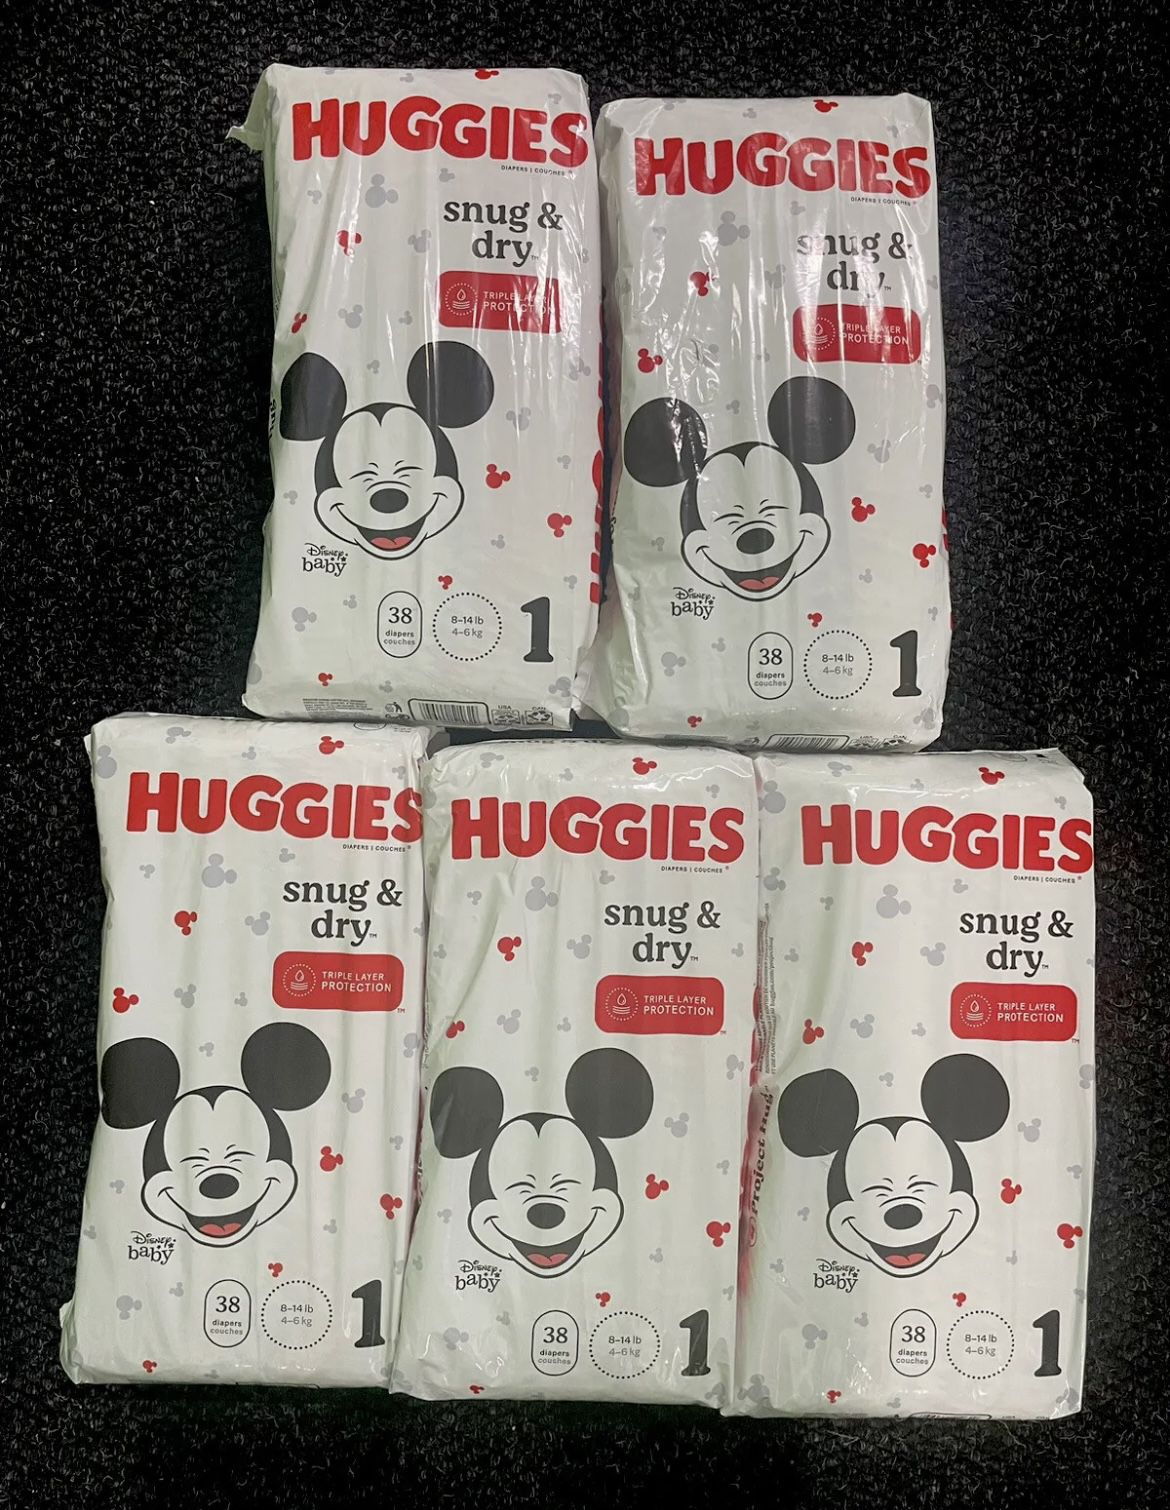 Lot Of 5 ~ Huggies Snug & Dry Baby Diapers Size 1 (8-14lbs) 38ct Each)